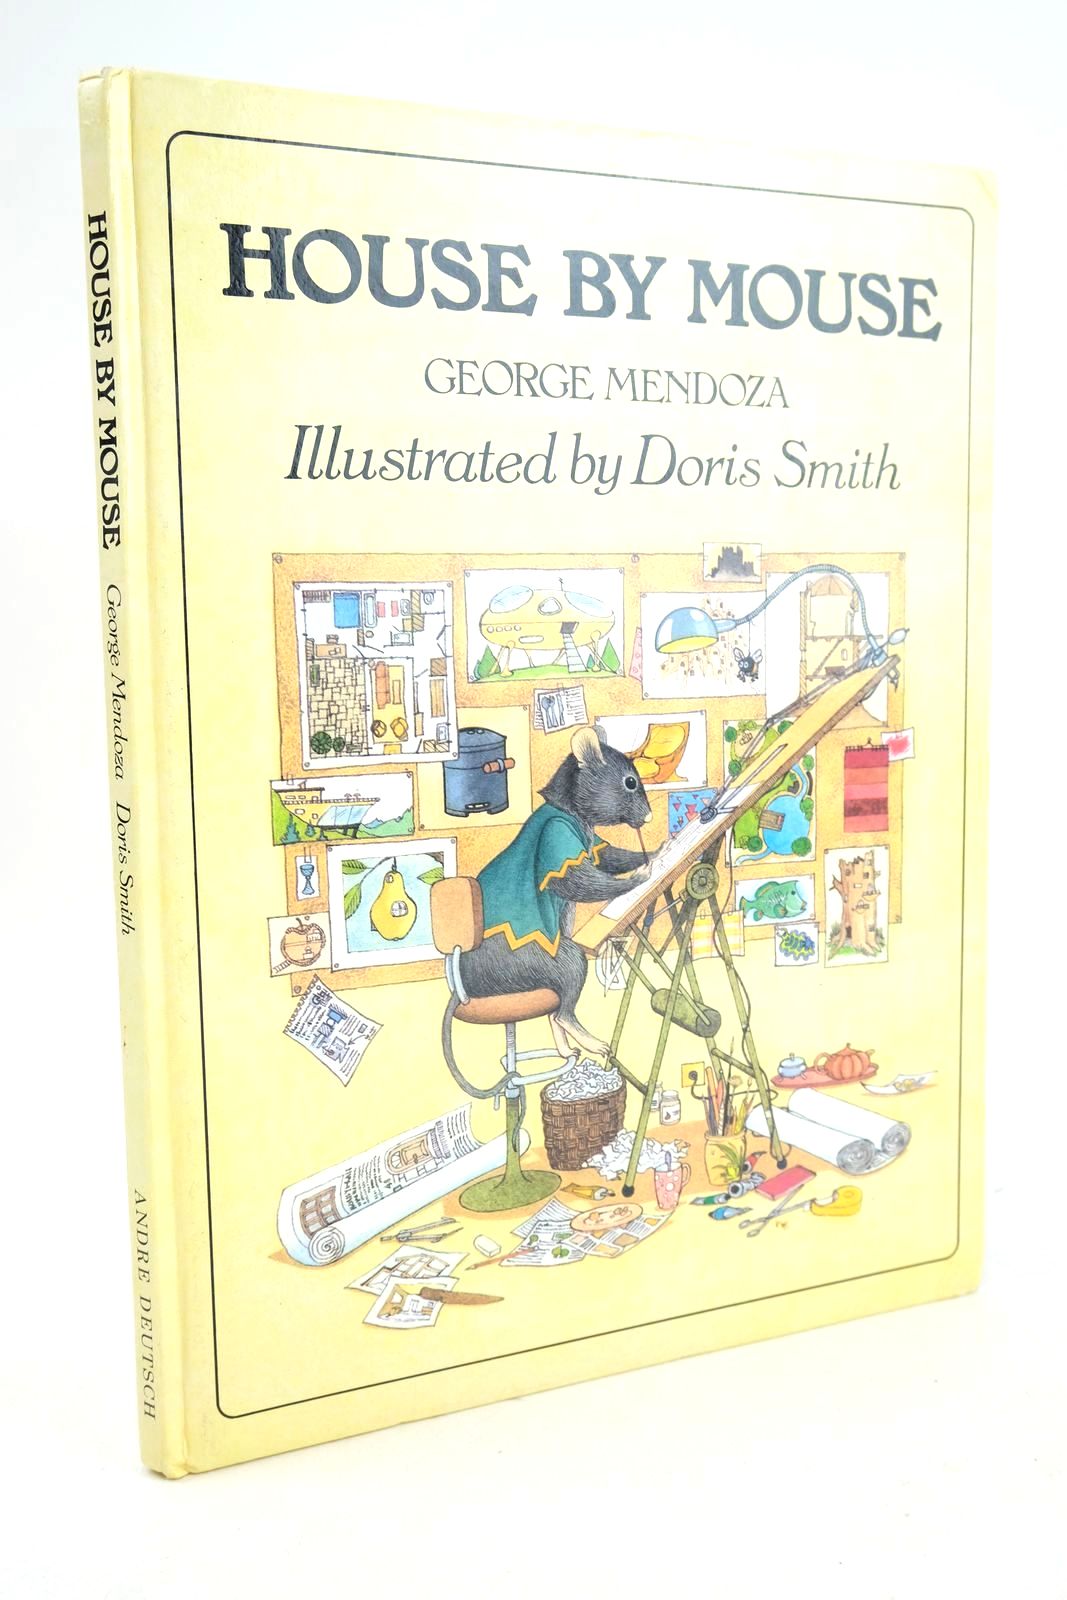 Photo of HOUSE BY MOUSE written by Mendoza, George illustrated by Smith, Doris published by Andre Deutsch (STOCK CODE: 1325617)  for sale by Stella & Rose's Books